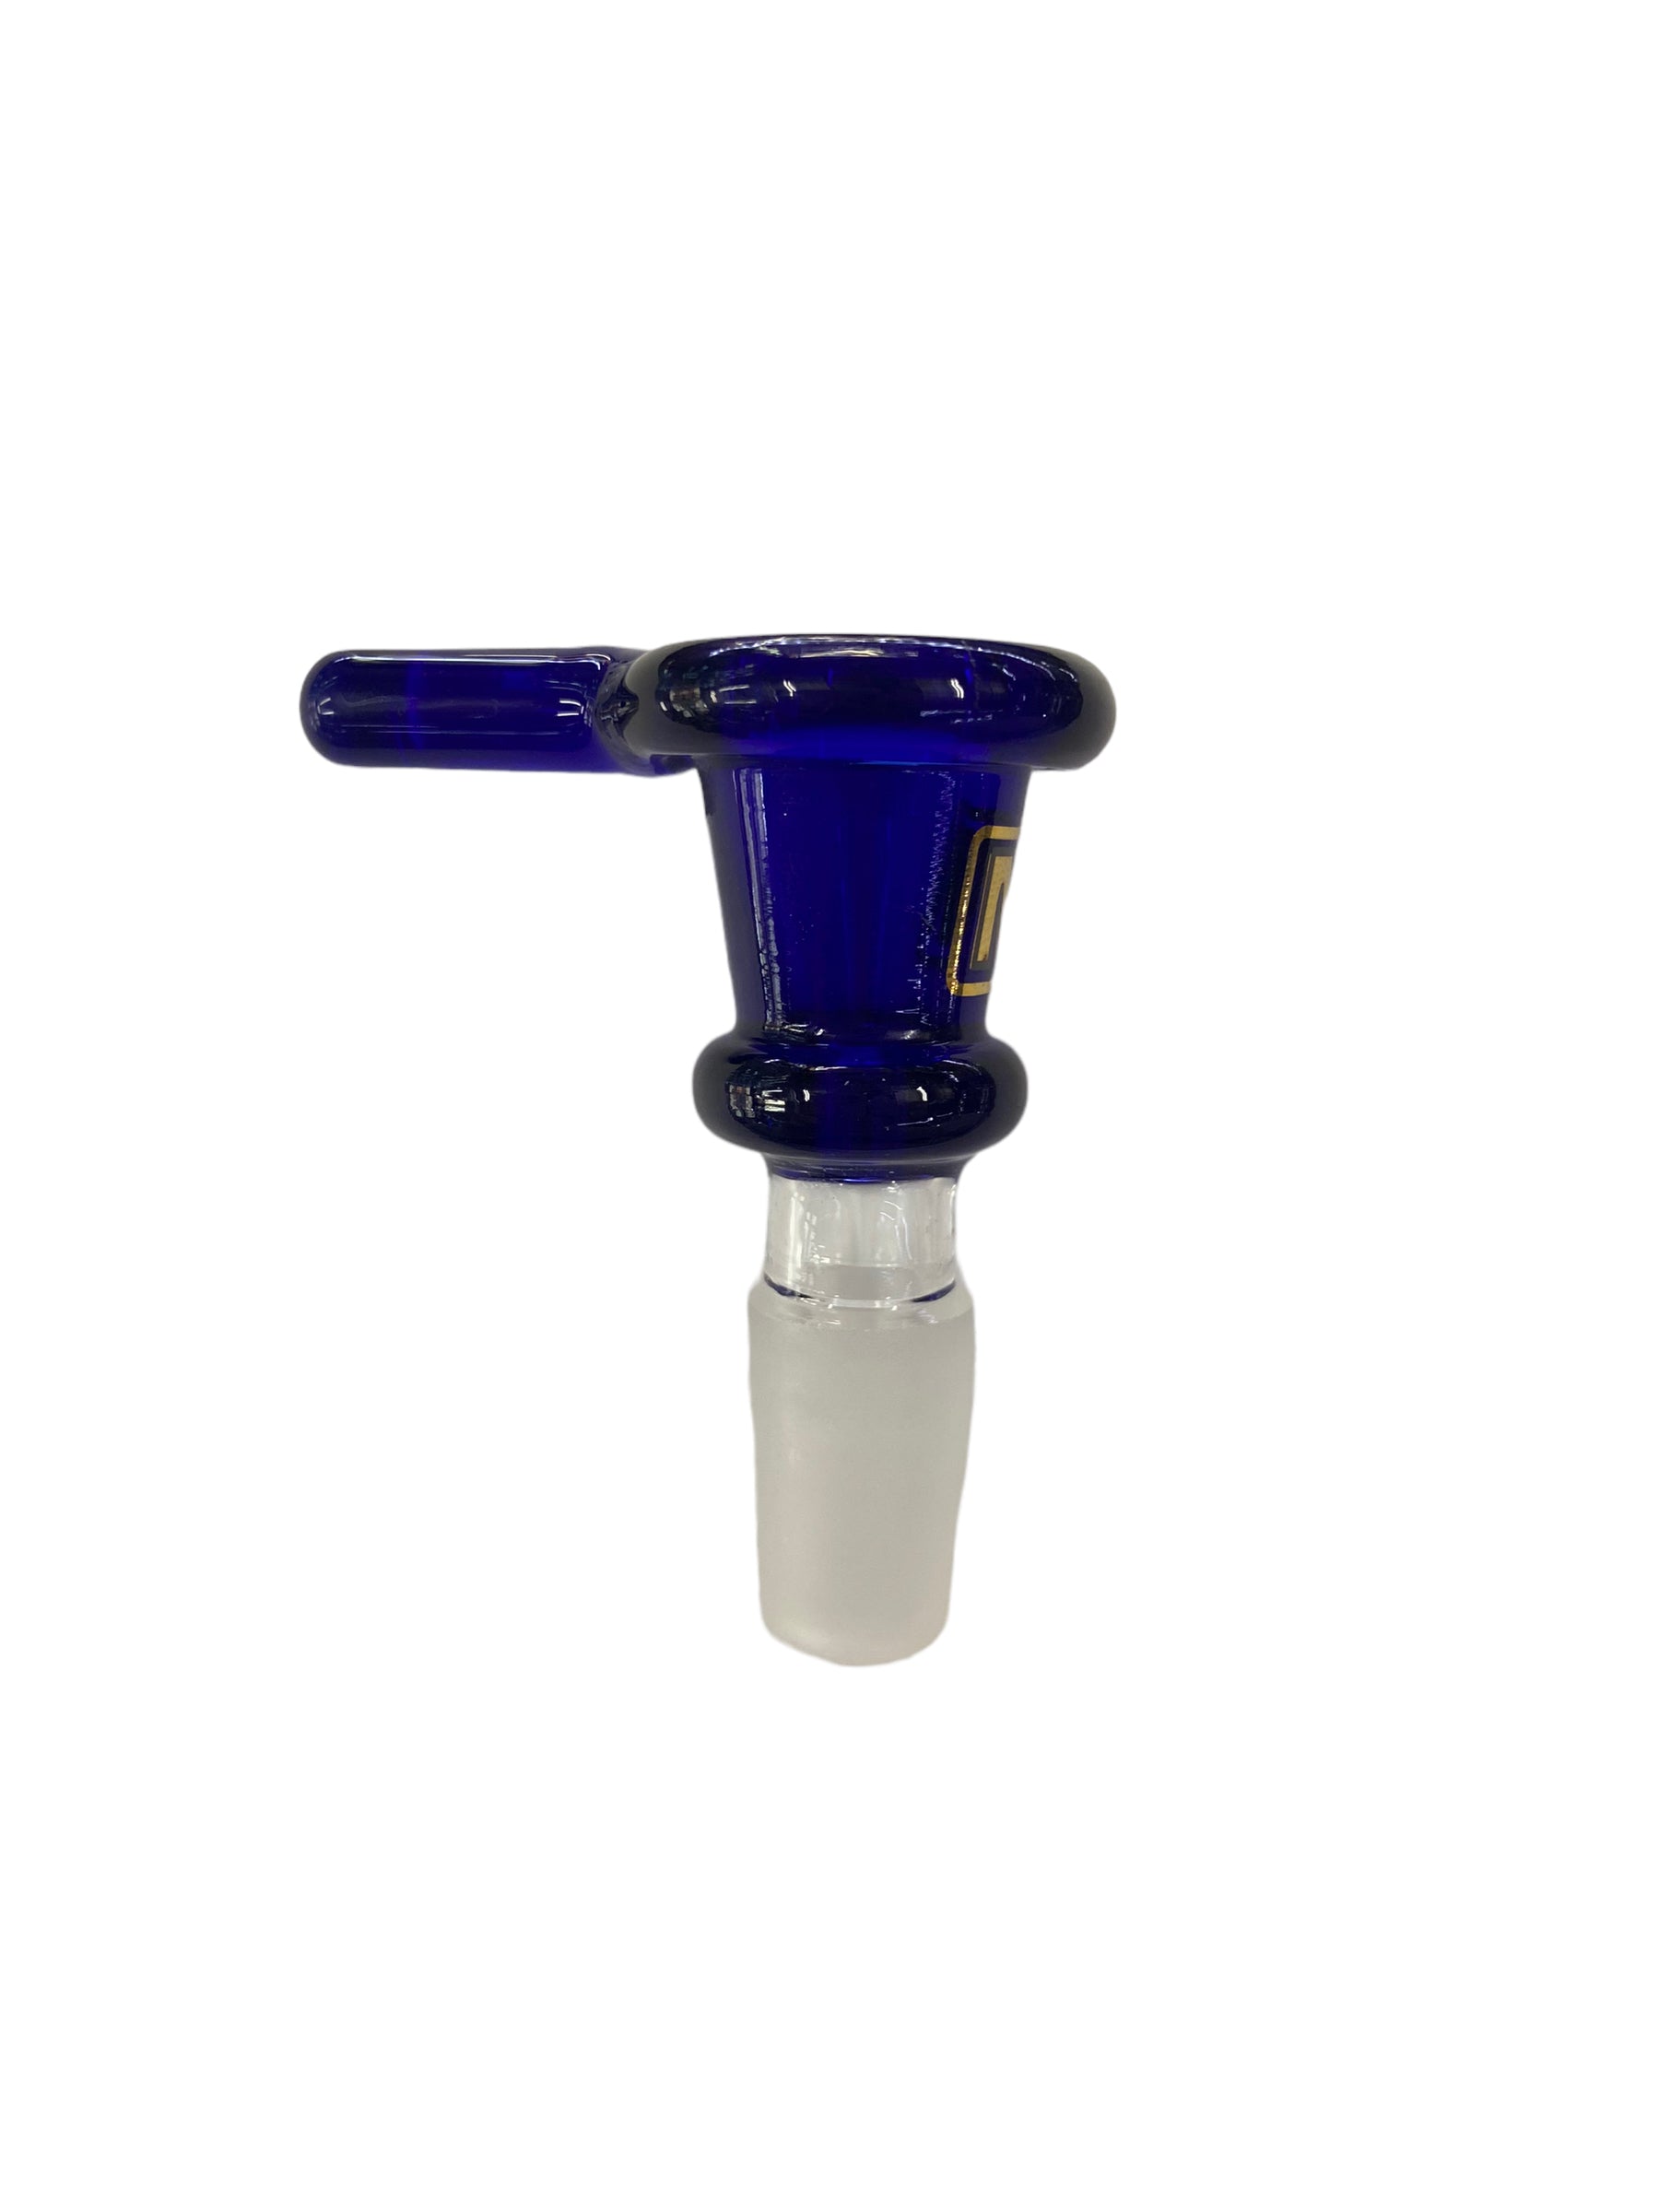 Marley (14mm) Glass Bowl blue - glass bowl - the wee smoke shop